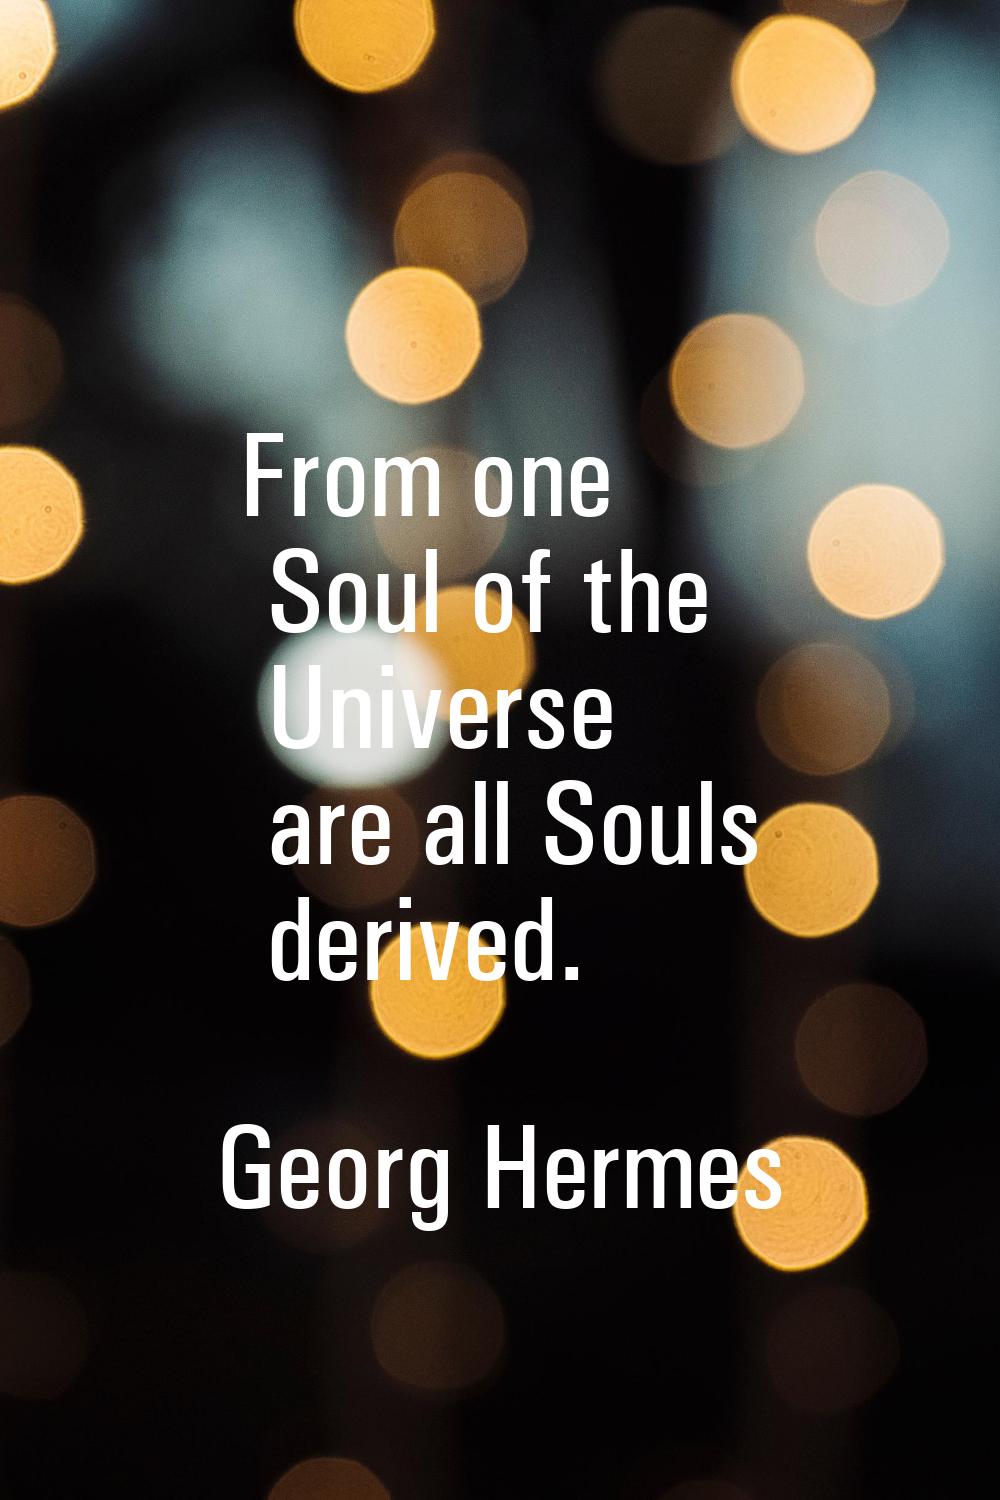 From one Soul of the Universe are all Souls derived.